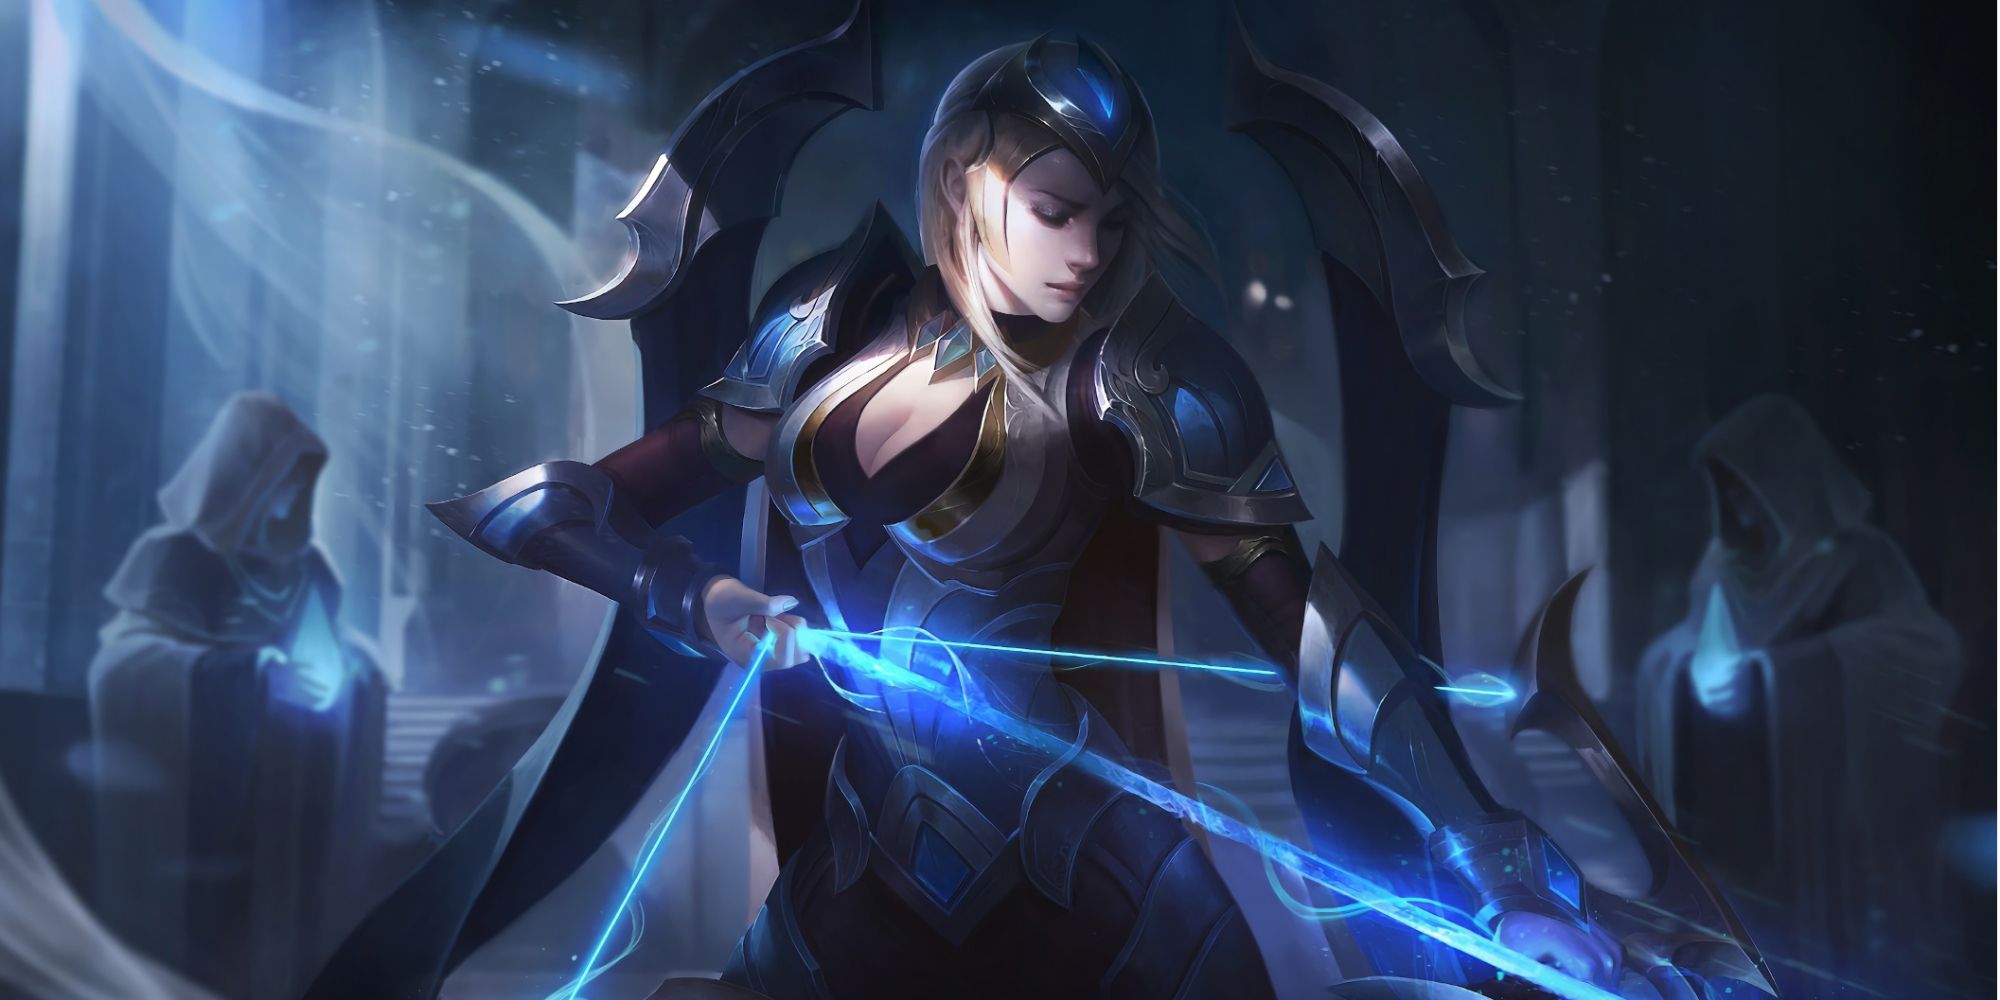 The Frost Archer with in her Championship skin with a dauntless expression looking epic with her blue bow string